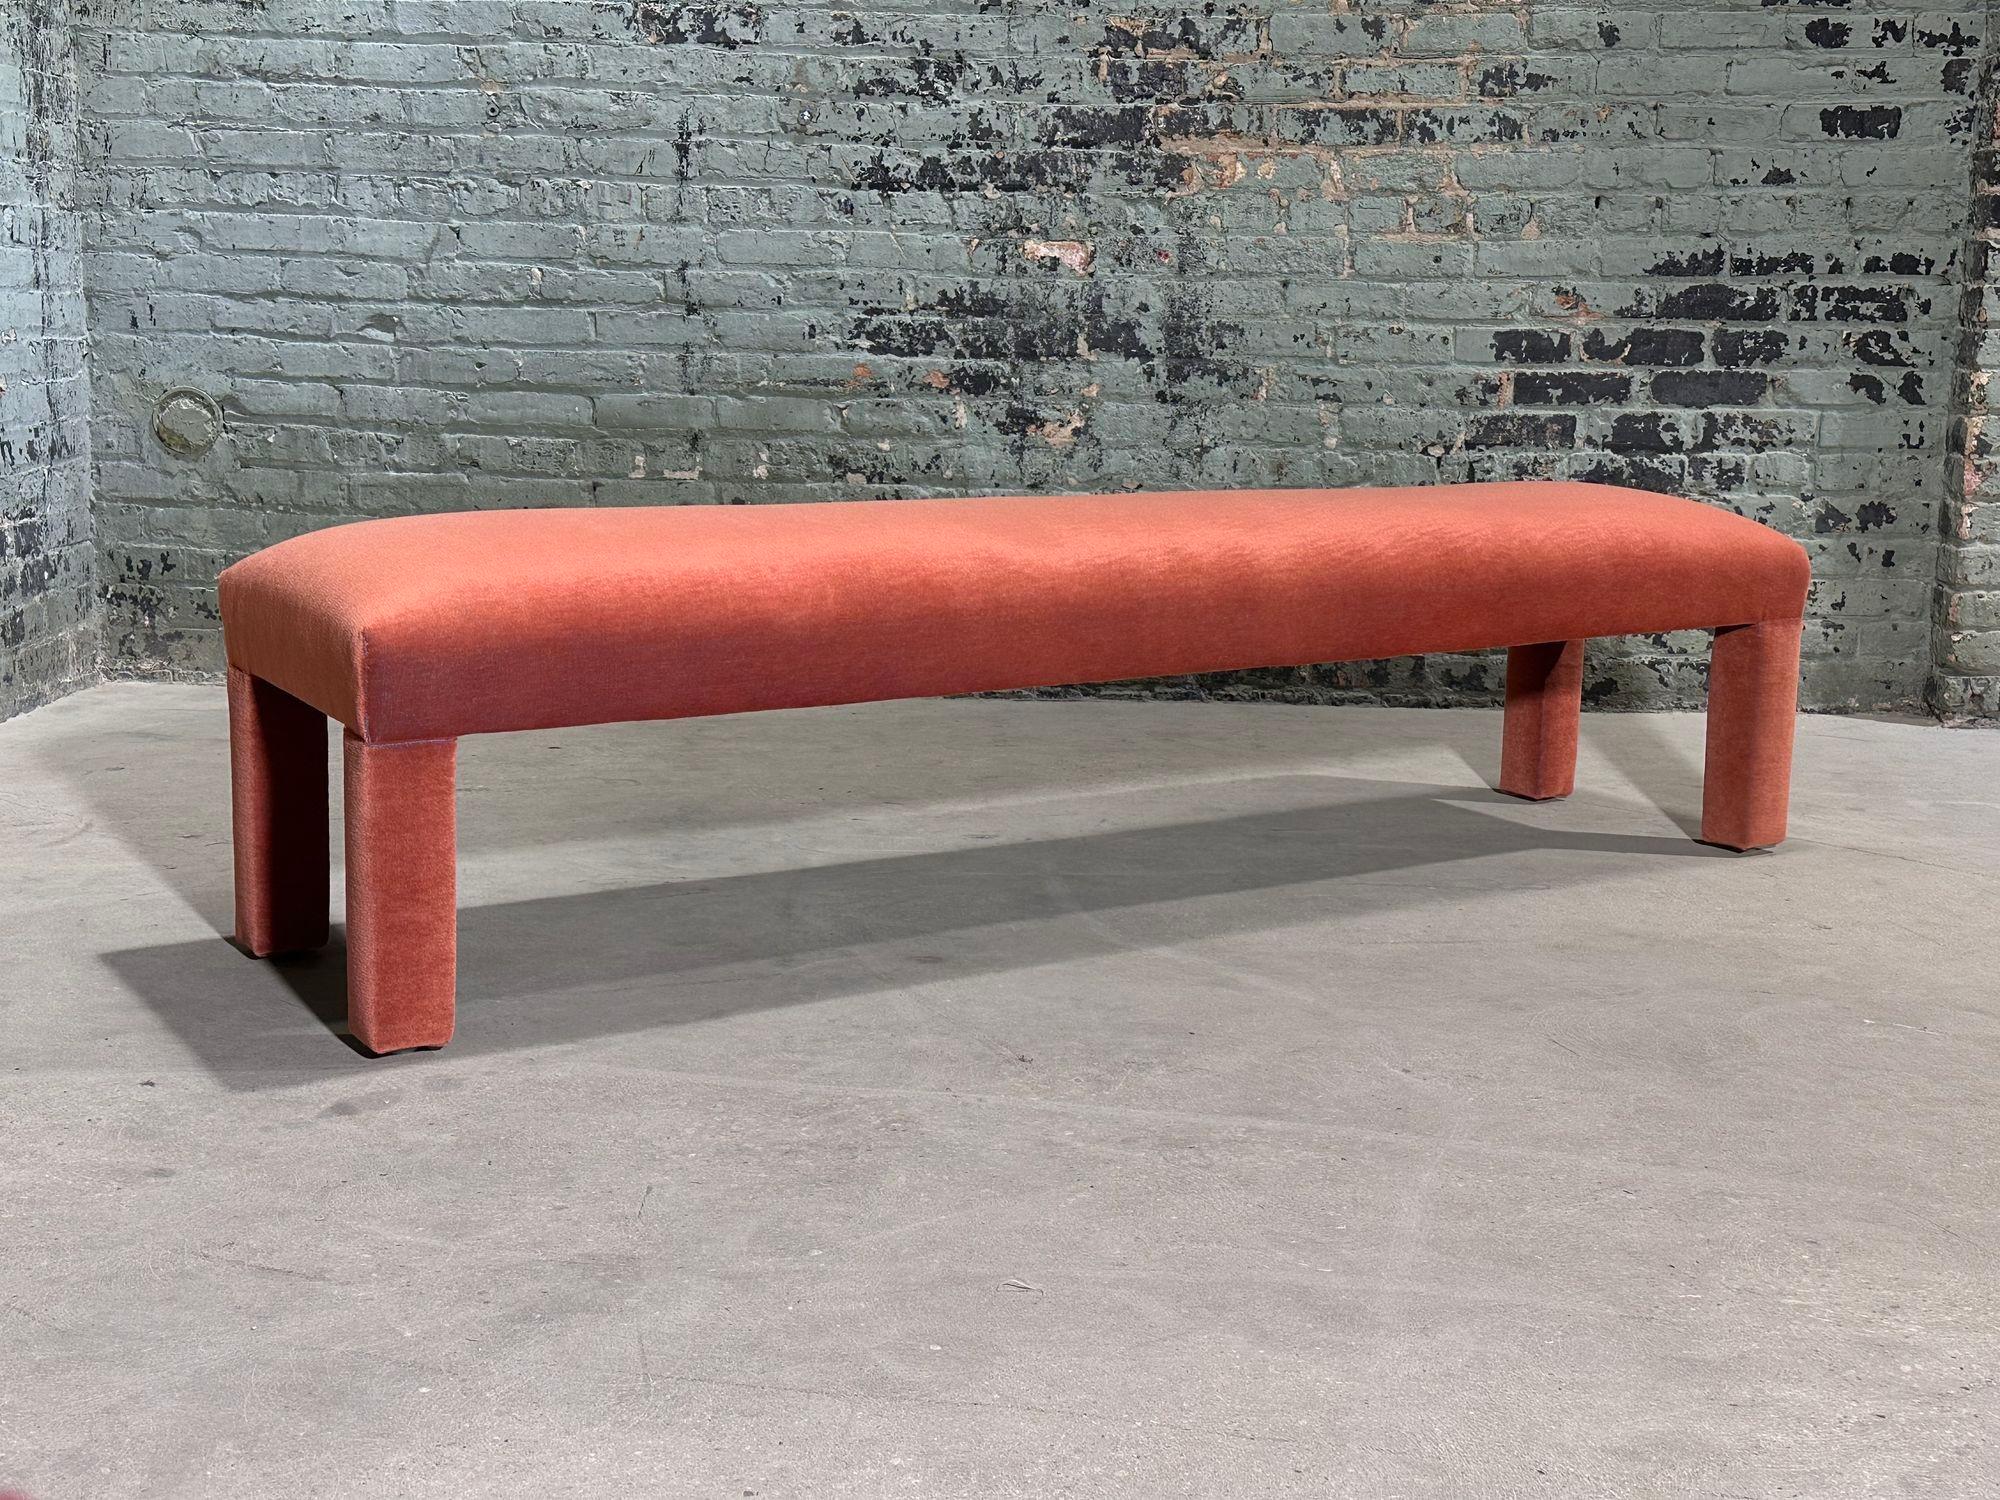 Parsons King Size Bench style of Milo Baughman, 1960. Fits great at the end of your king size bed. Newly reupholstered in mohair multi dimensions, 2 tone pink mohair woven into blue backing.
Measures 76